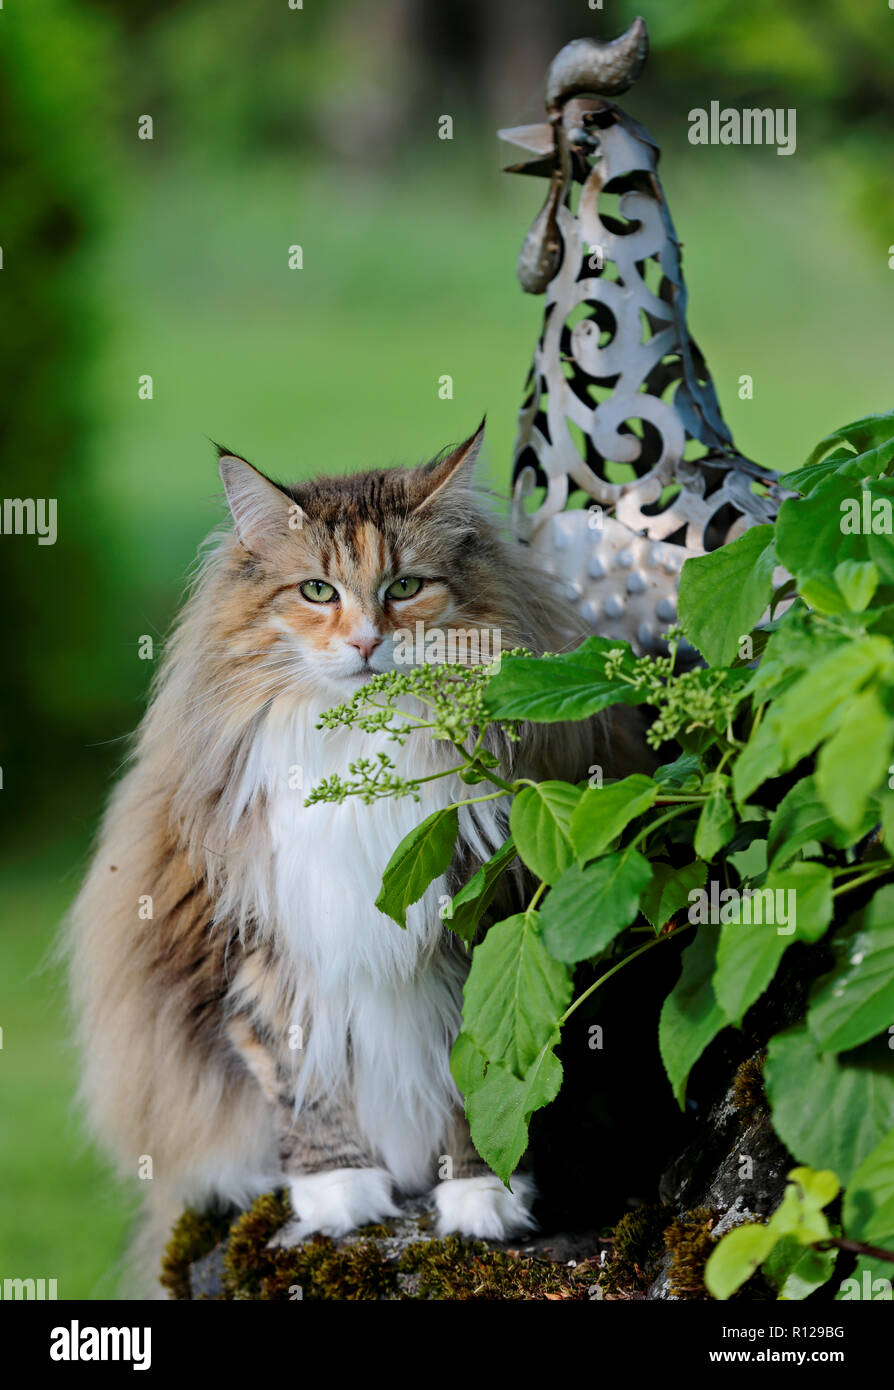 Norwegian forest cat behind a green plant in garden Stock Photo